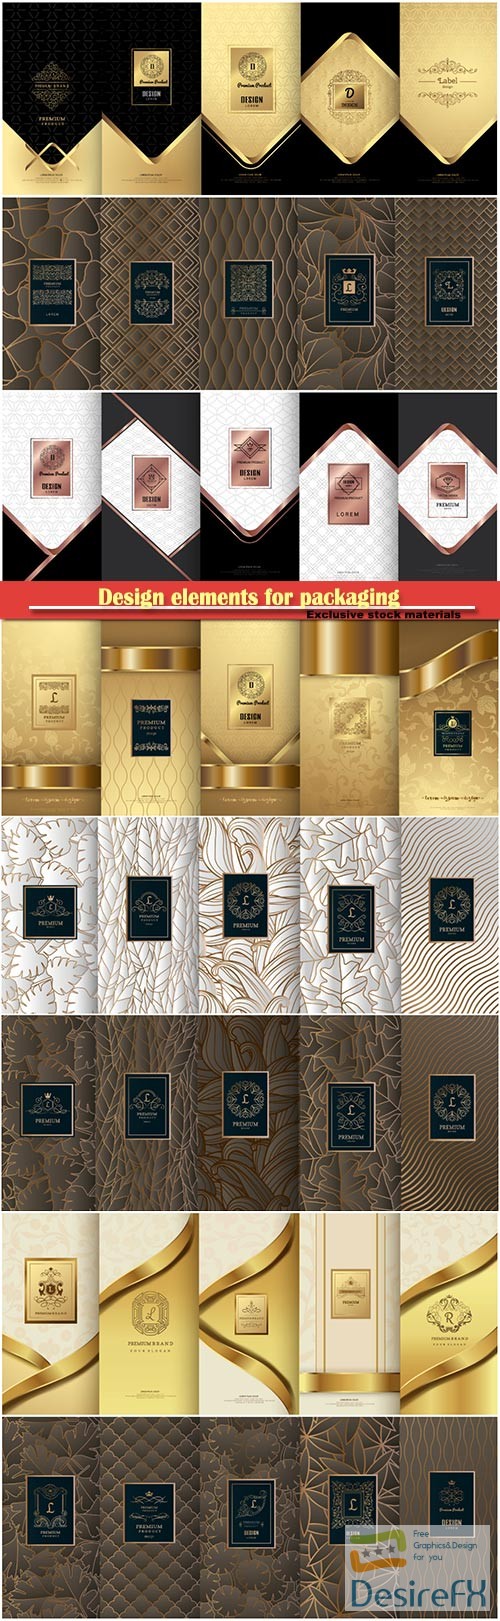 Design elements for packaging, design of luxury products for perfume